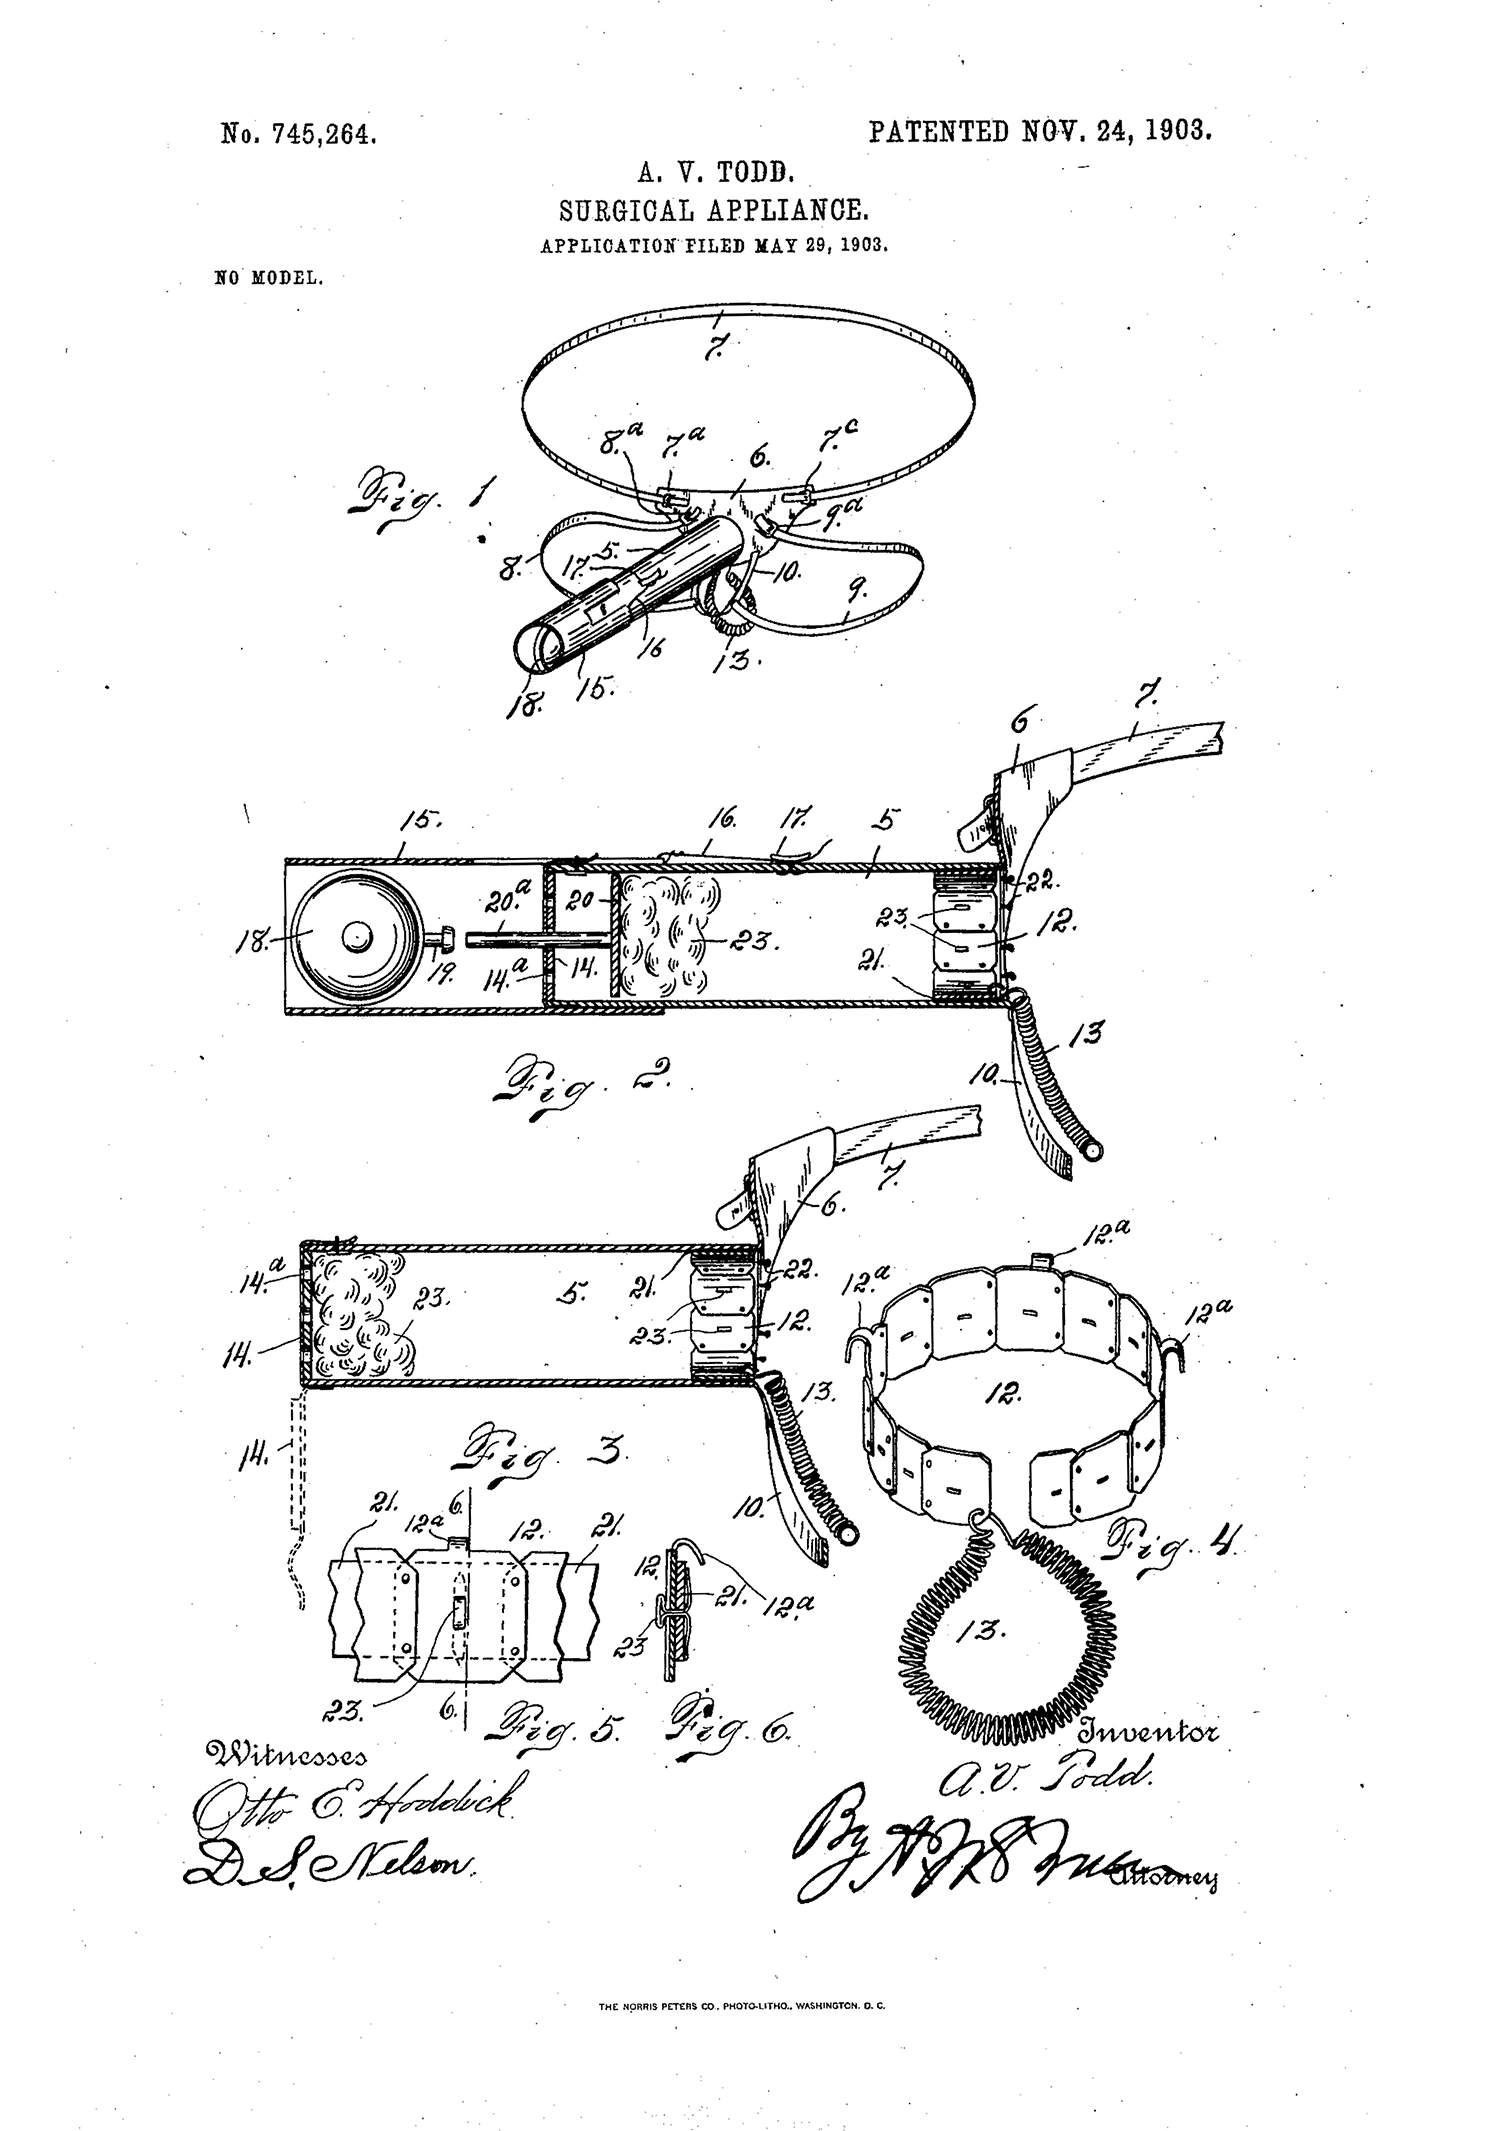 The patent diagram depicts a contraption resembling a belt with an apparatus at the middle of it. The elaborate device seems to contain springs, pins, and spikes. 